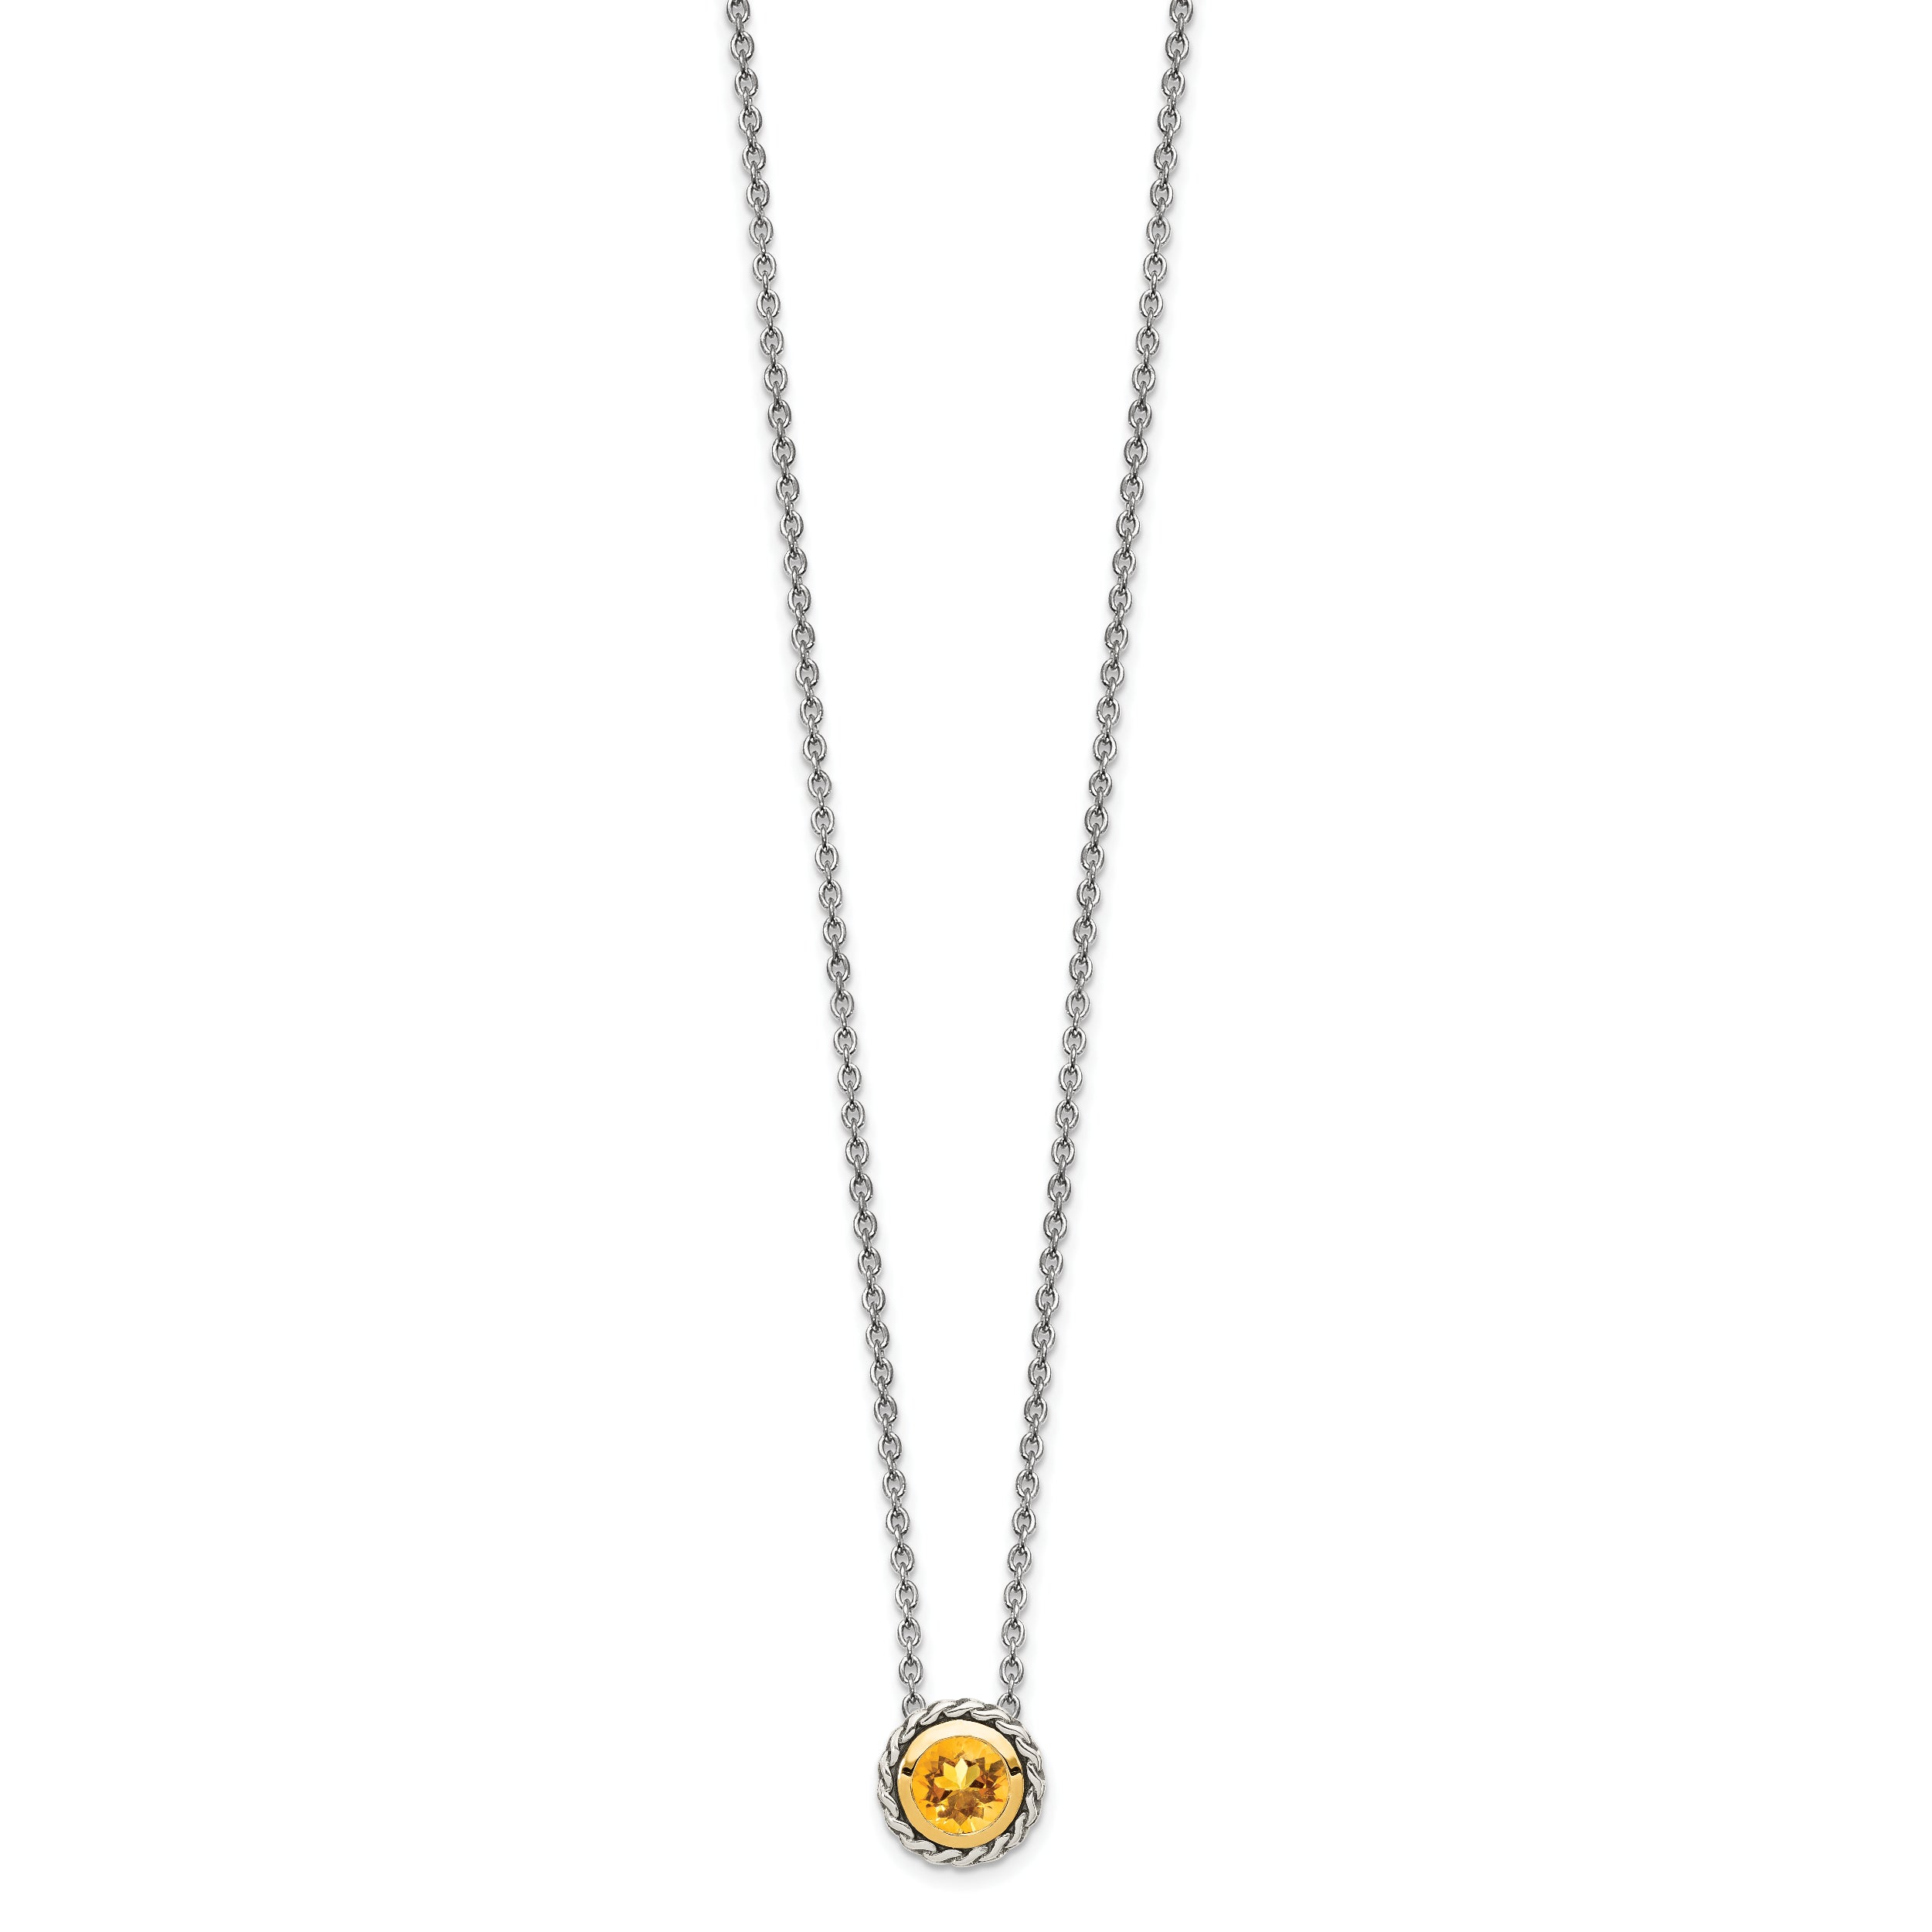 Shey Couture Sterling Silver with 14K Accent 18 Inch Antiqued Round Bezel Citrine Necklace